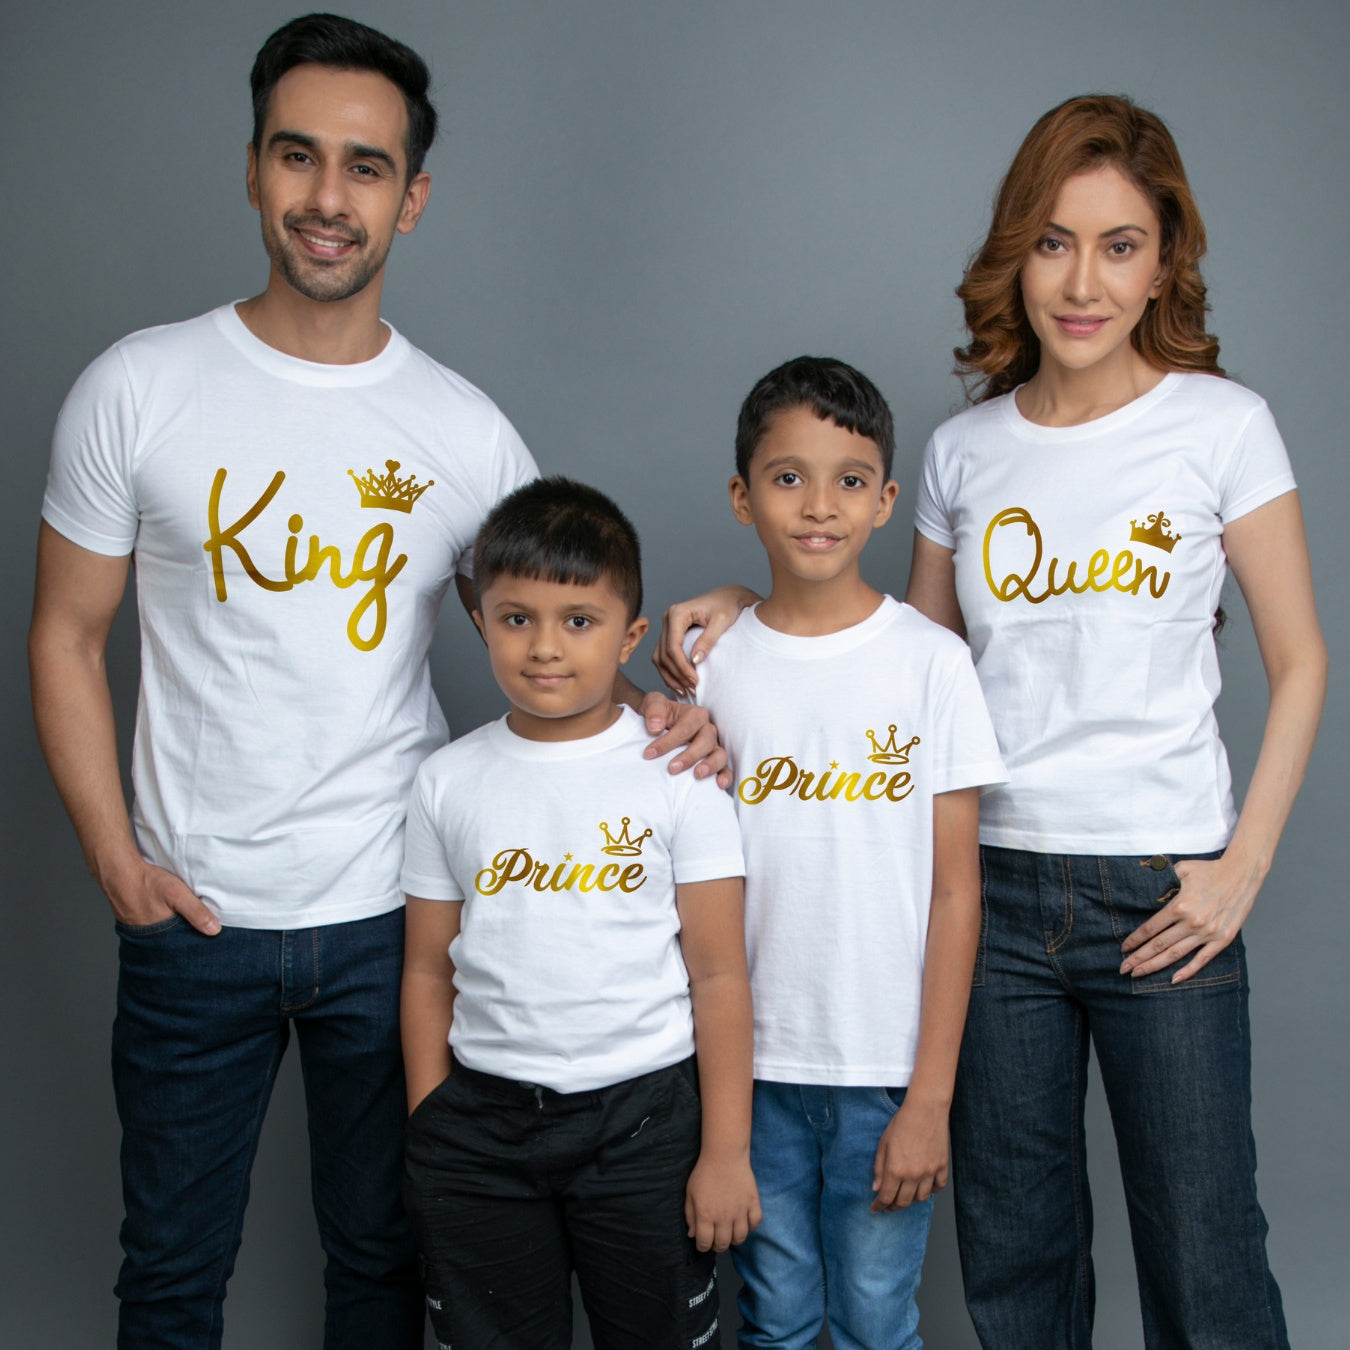 Family t shirts set of 4 Mom Dad Two Sons in White Colour - King Queen Prince All Gold Variant